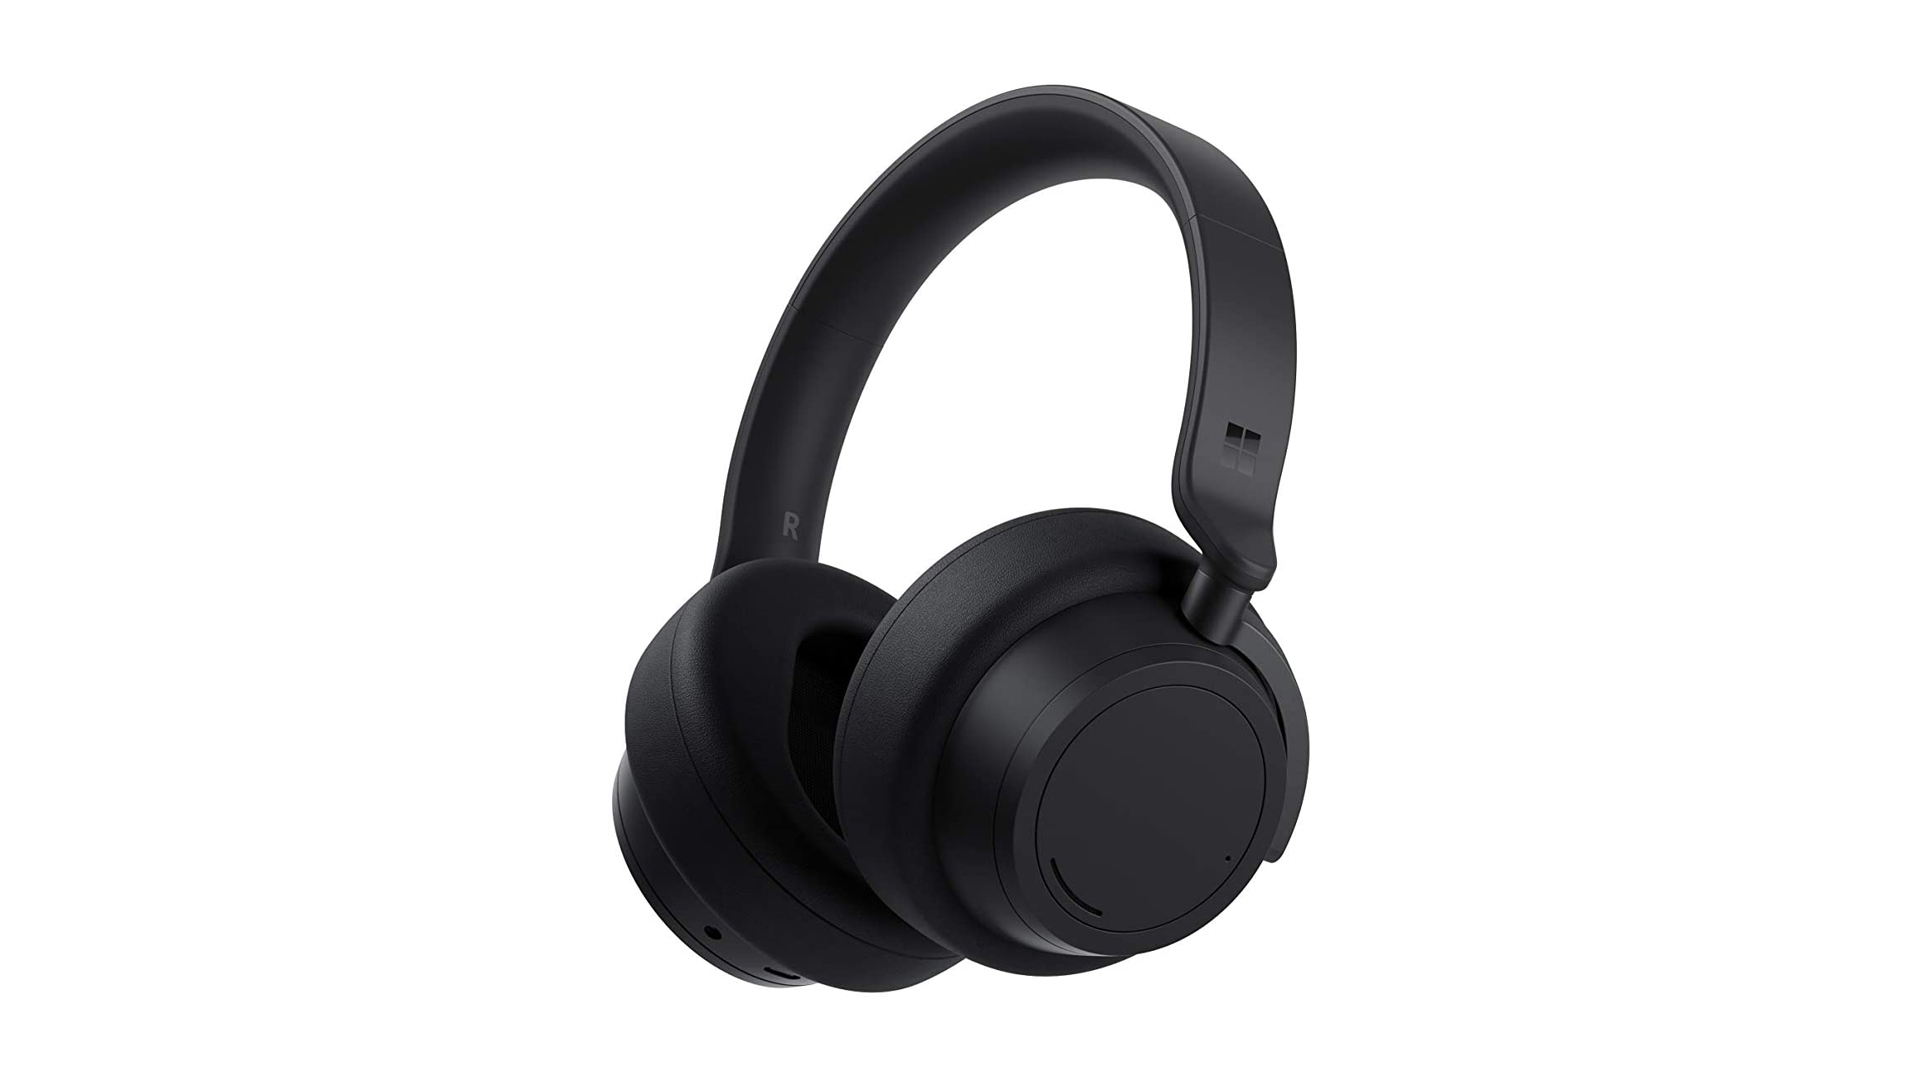 A product render of the Microsoft Surface Headphones 2 in black against a white background.